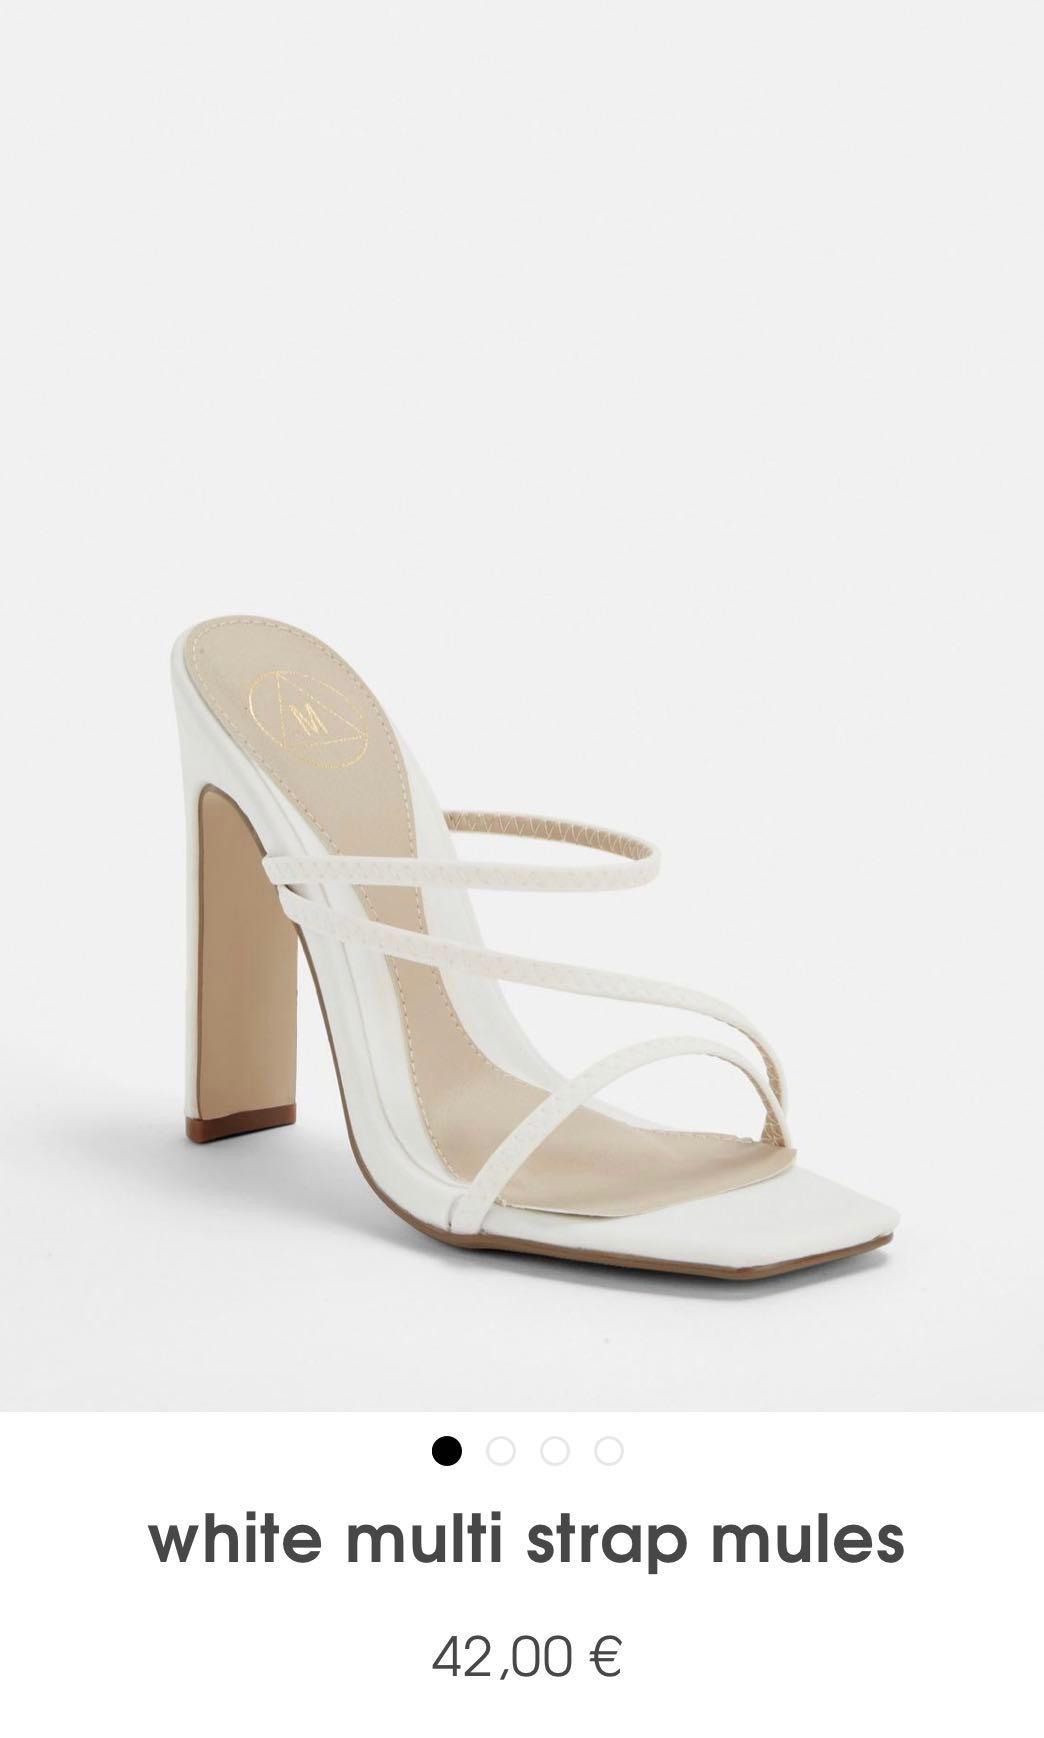 white strappy shoes